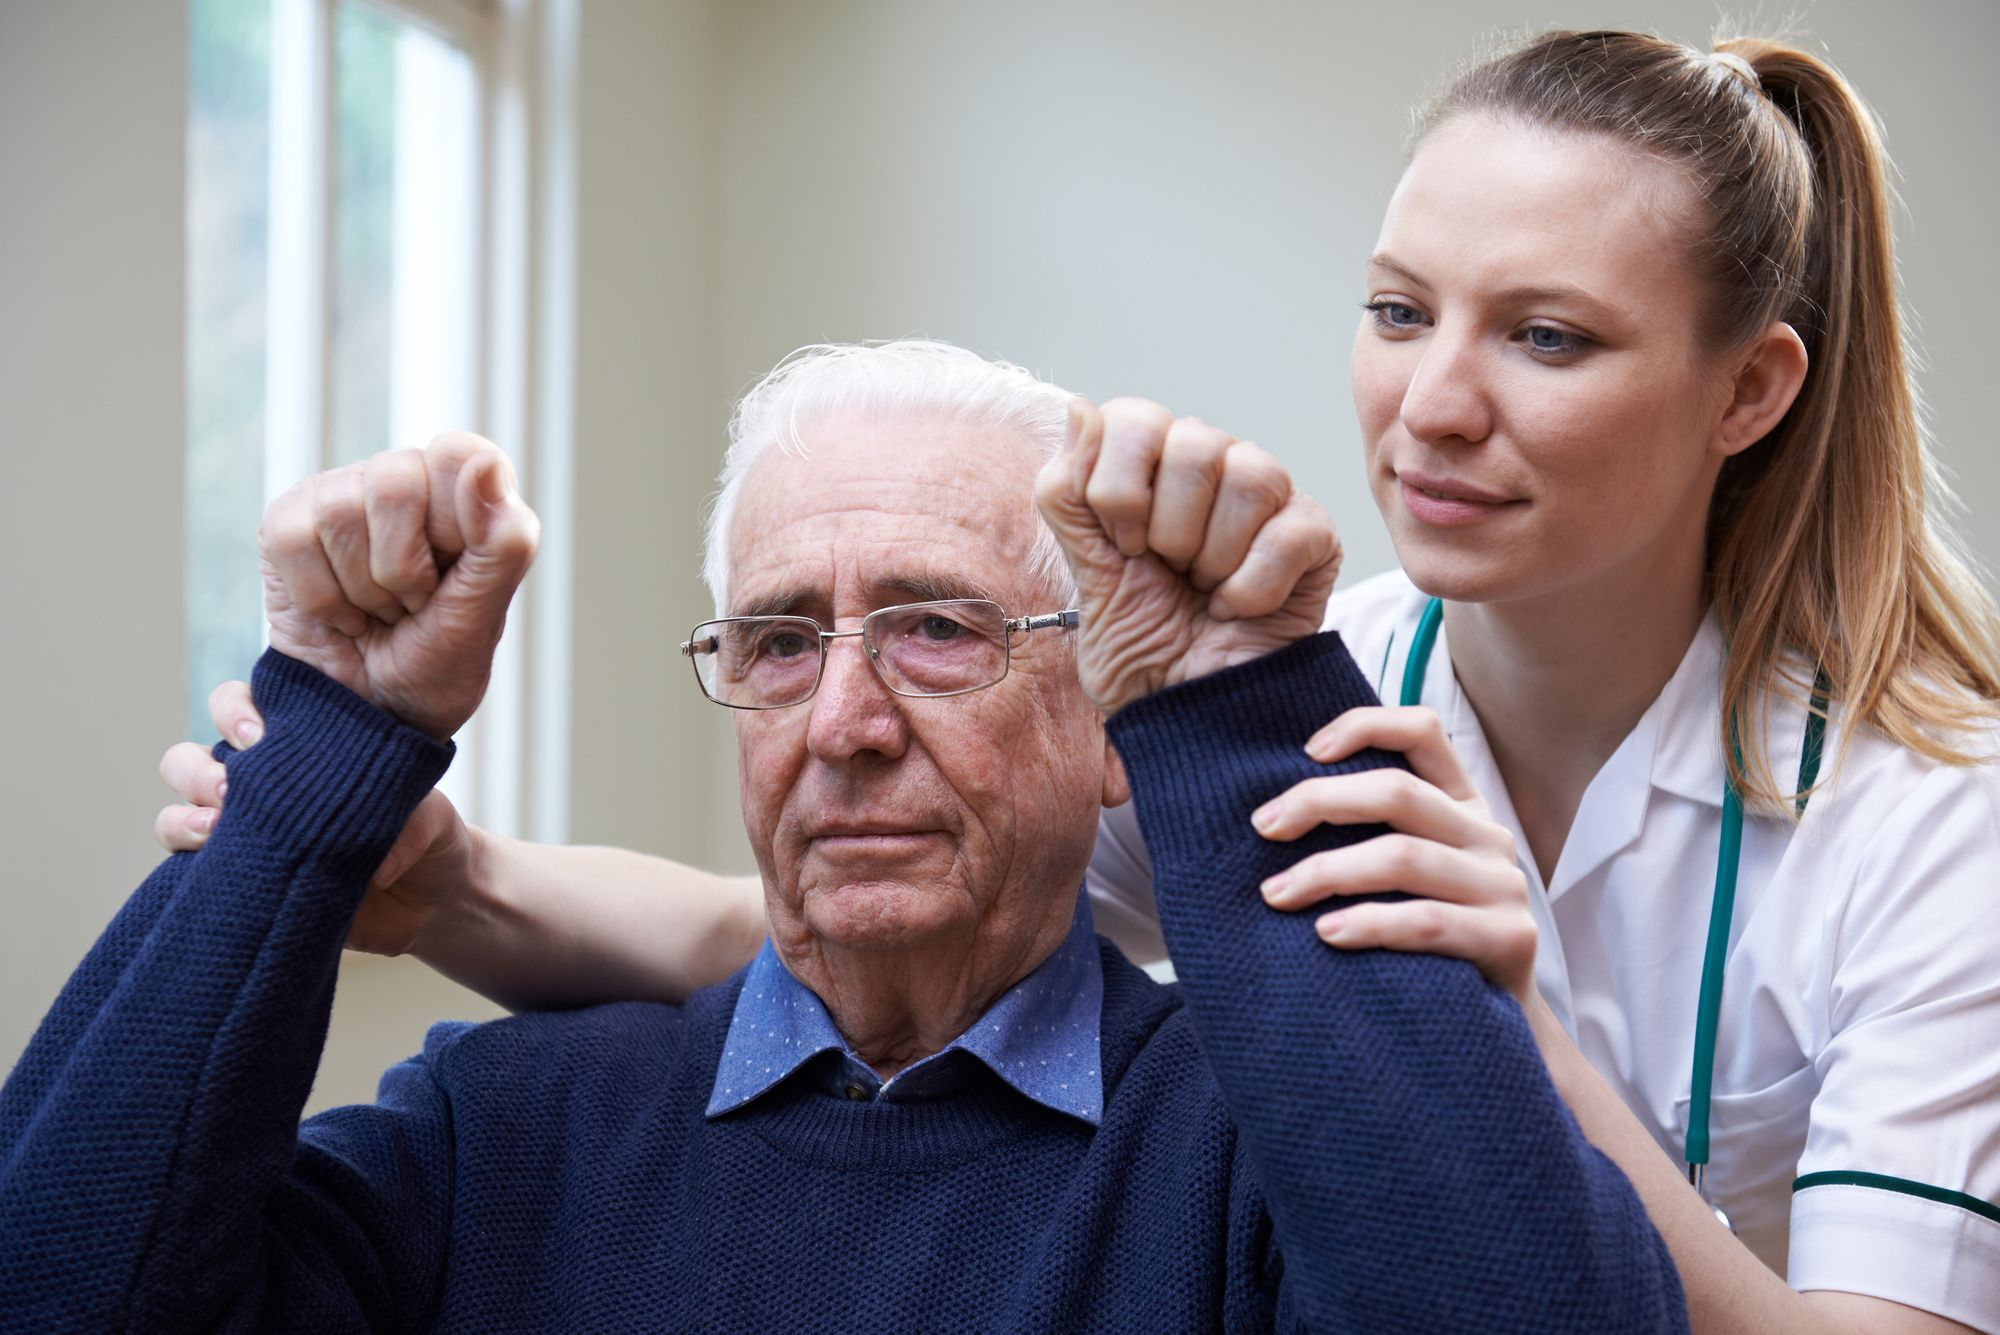 Older patient in stroke rehab with a clinician